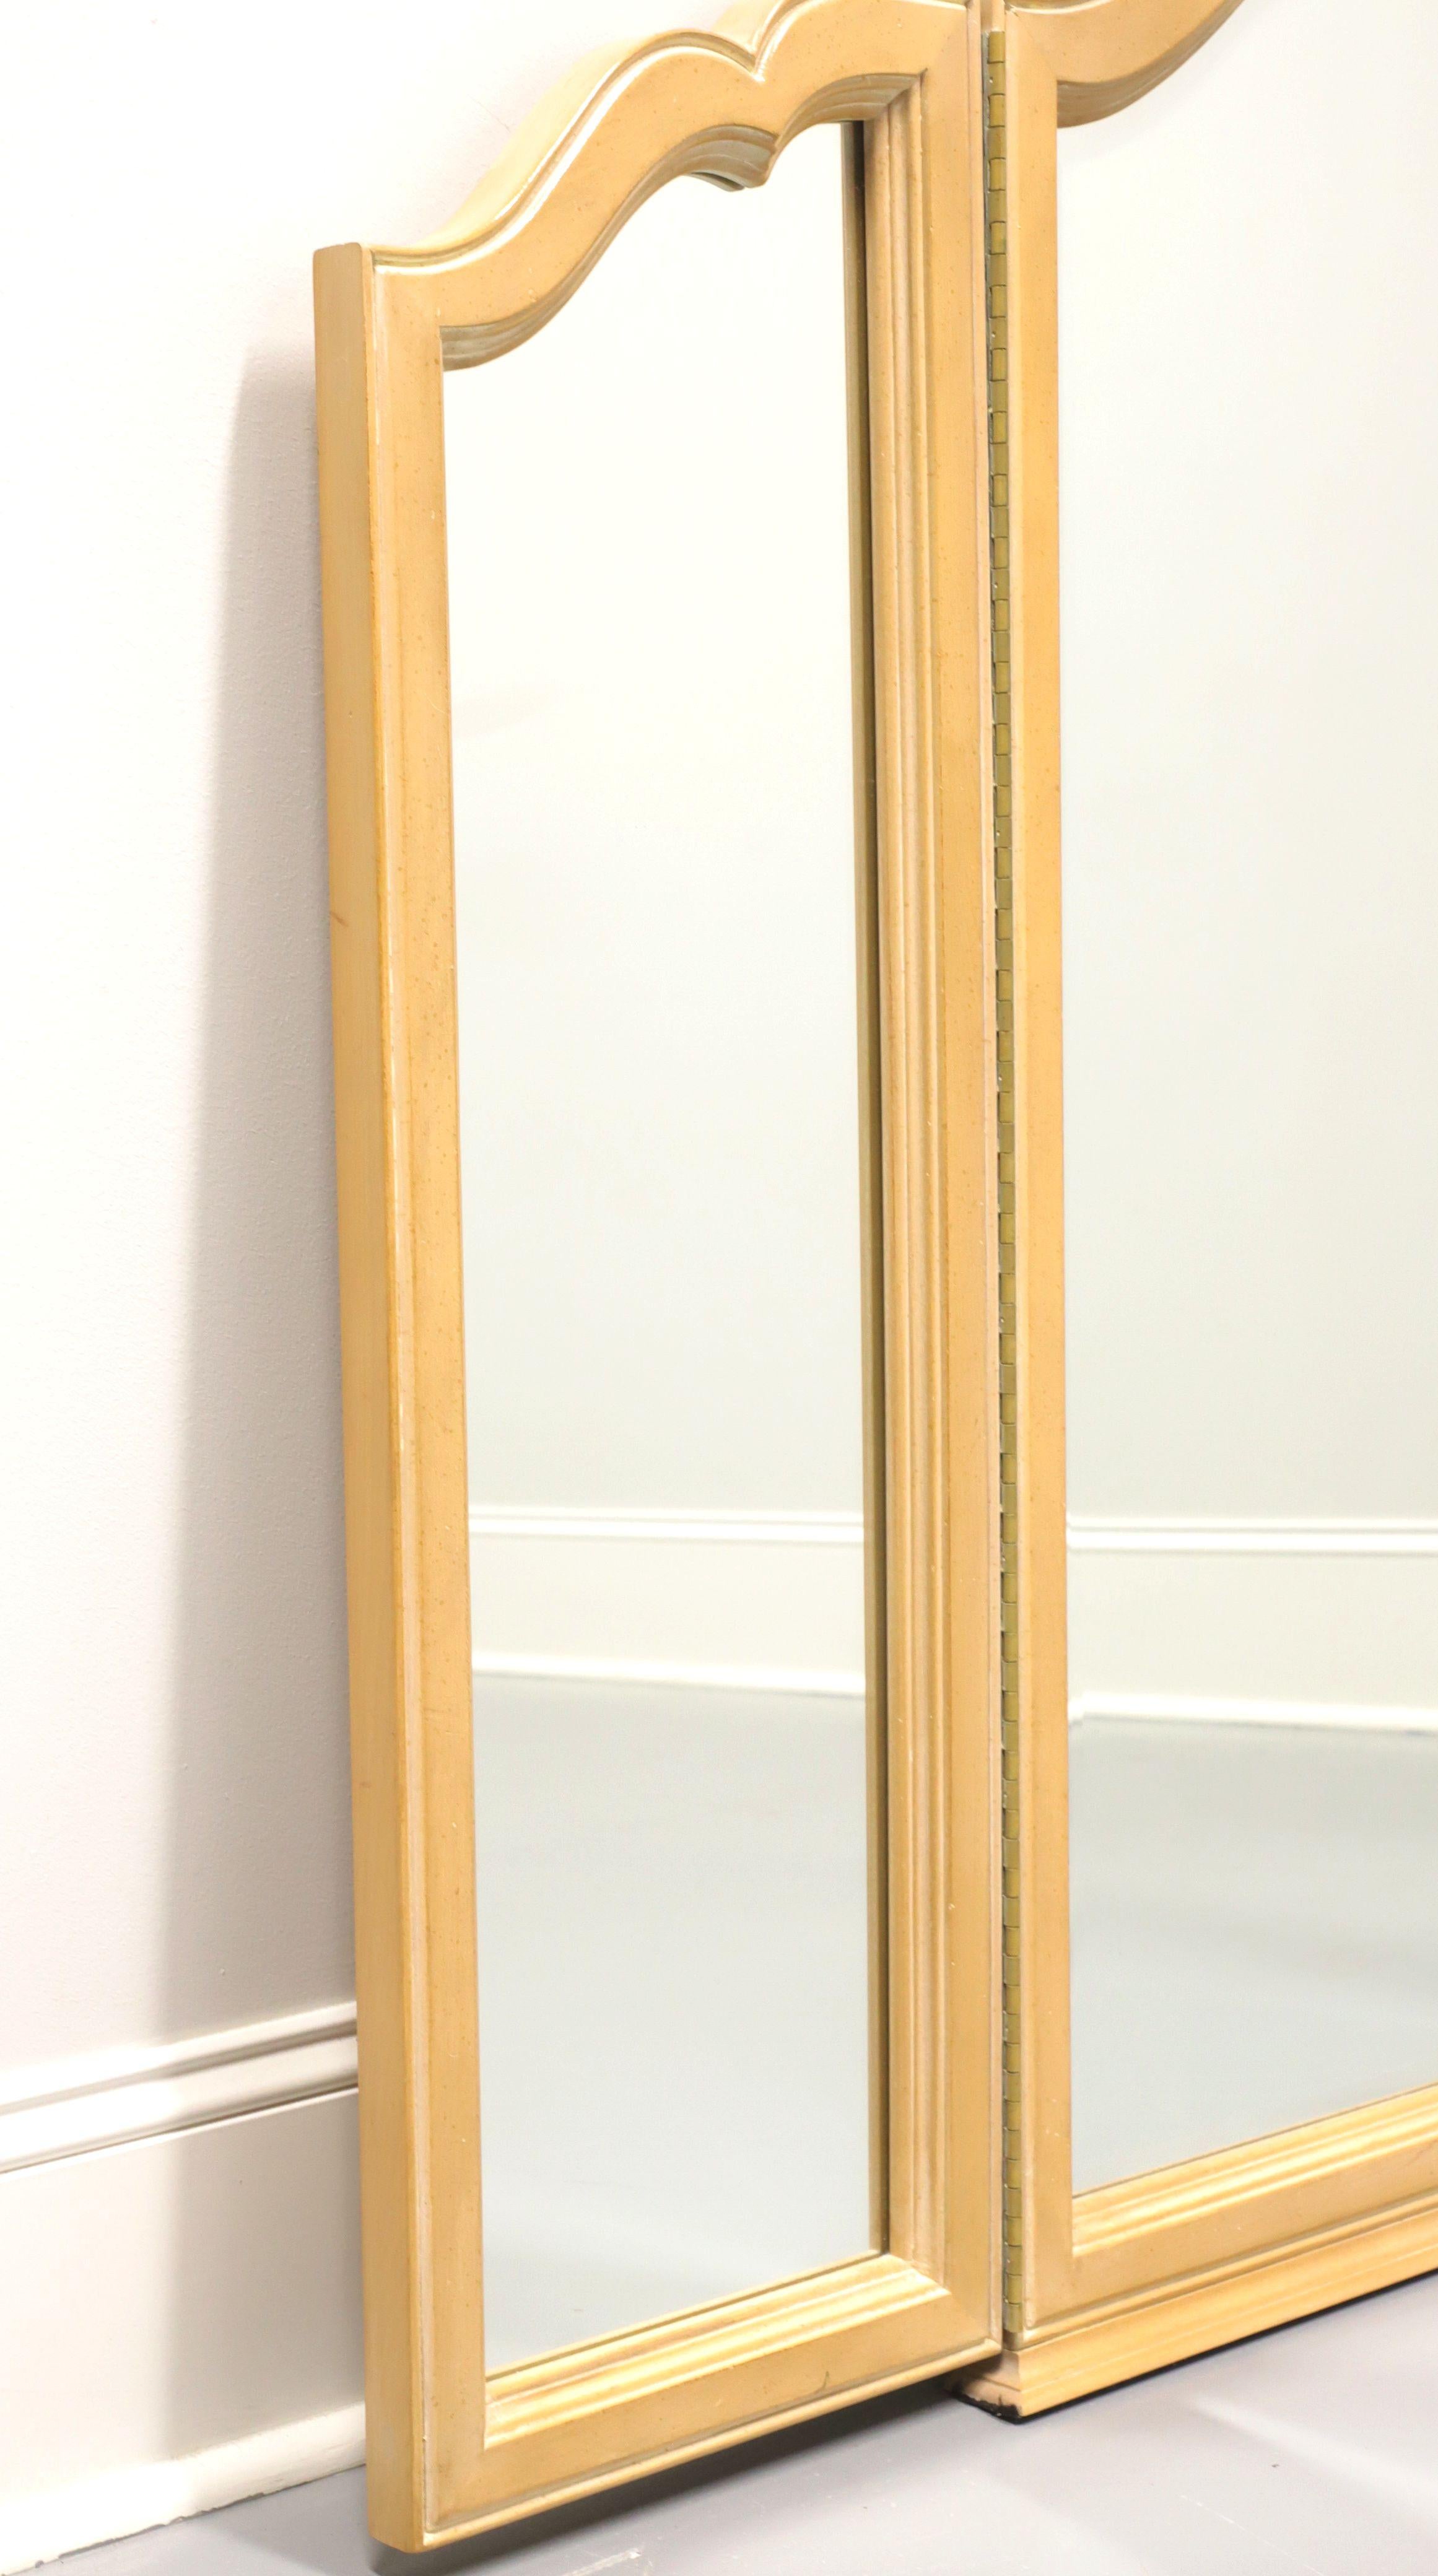 A tri-fold dresser mirror in the French Country style, unbranded, similar quality to Thomasville. Solid hardwood with distressed whitewashed finish. Features bevel edge center mirror with carved shell to top and two side mirrors that can fold